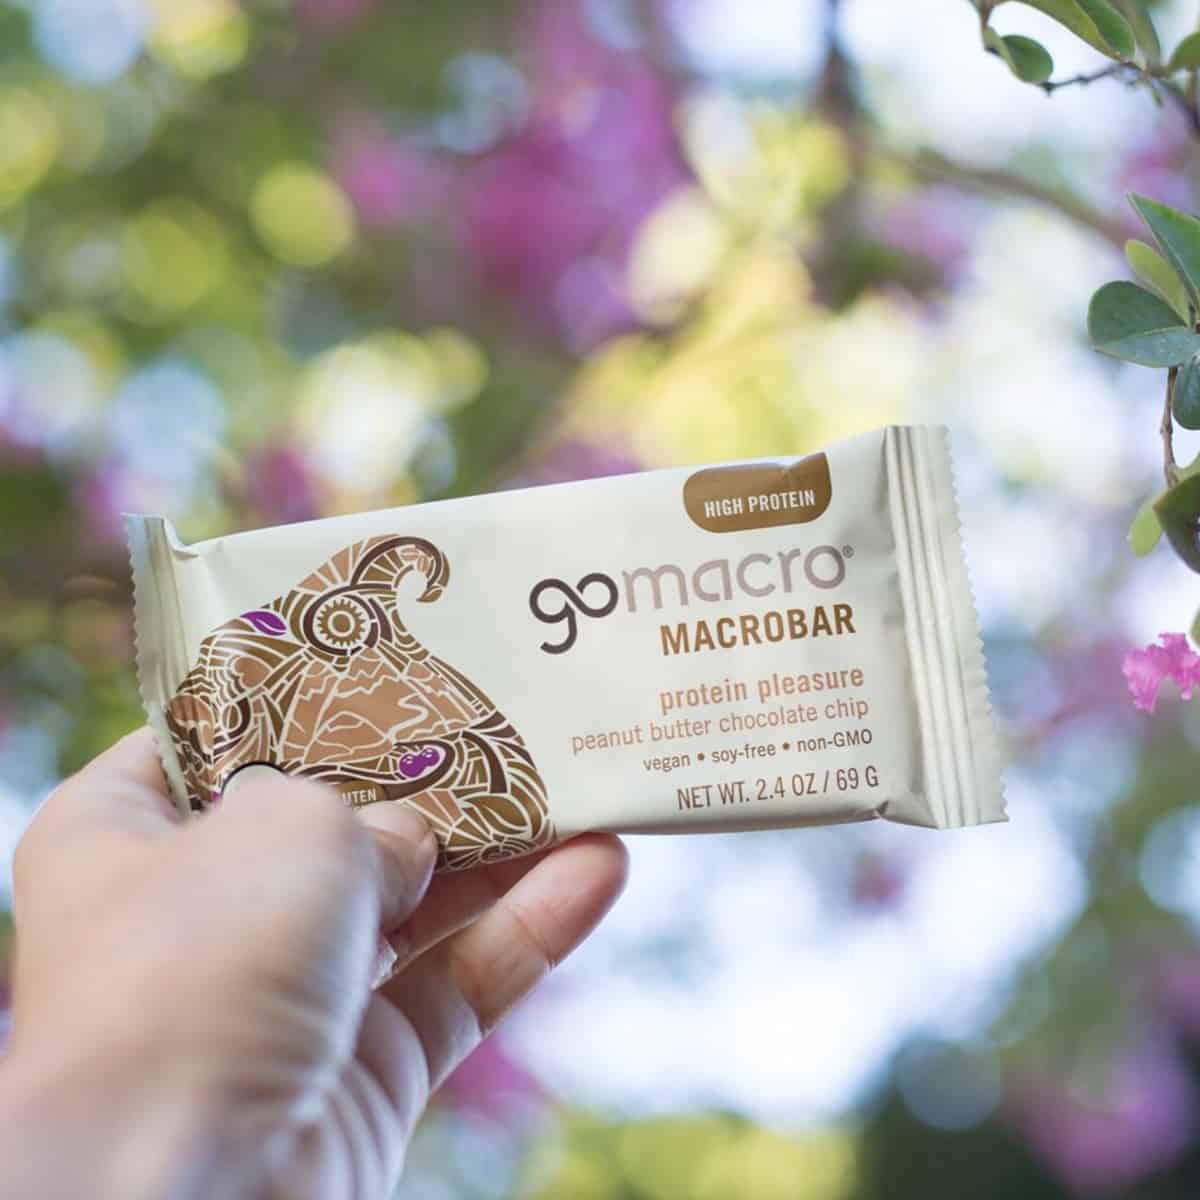 Hand holding out vegan peanut butter chocolate chip protein bar from Go Macro.